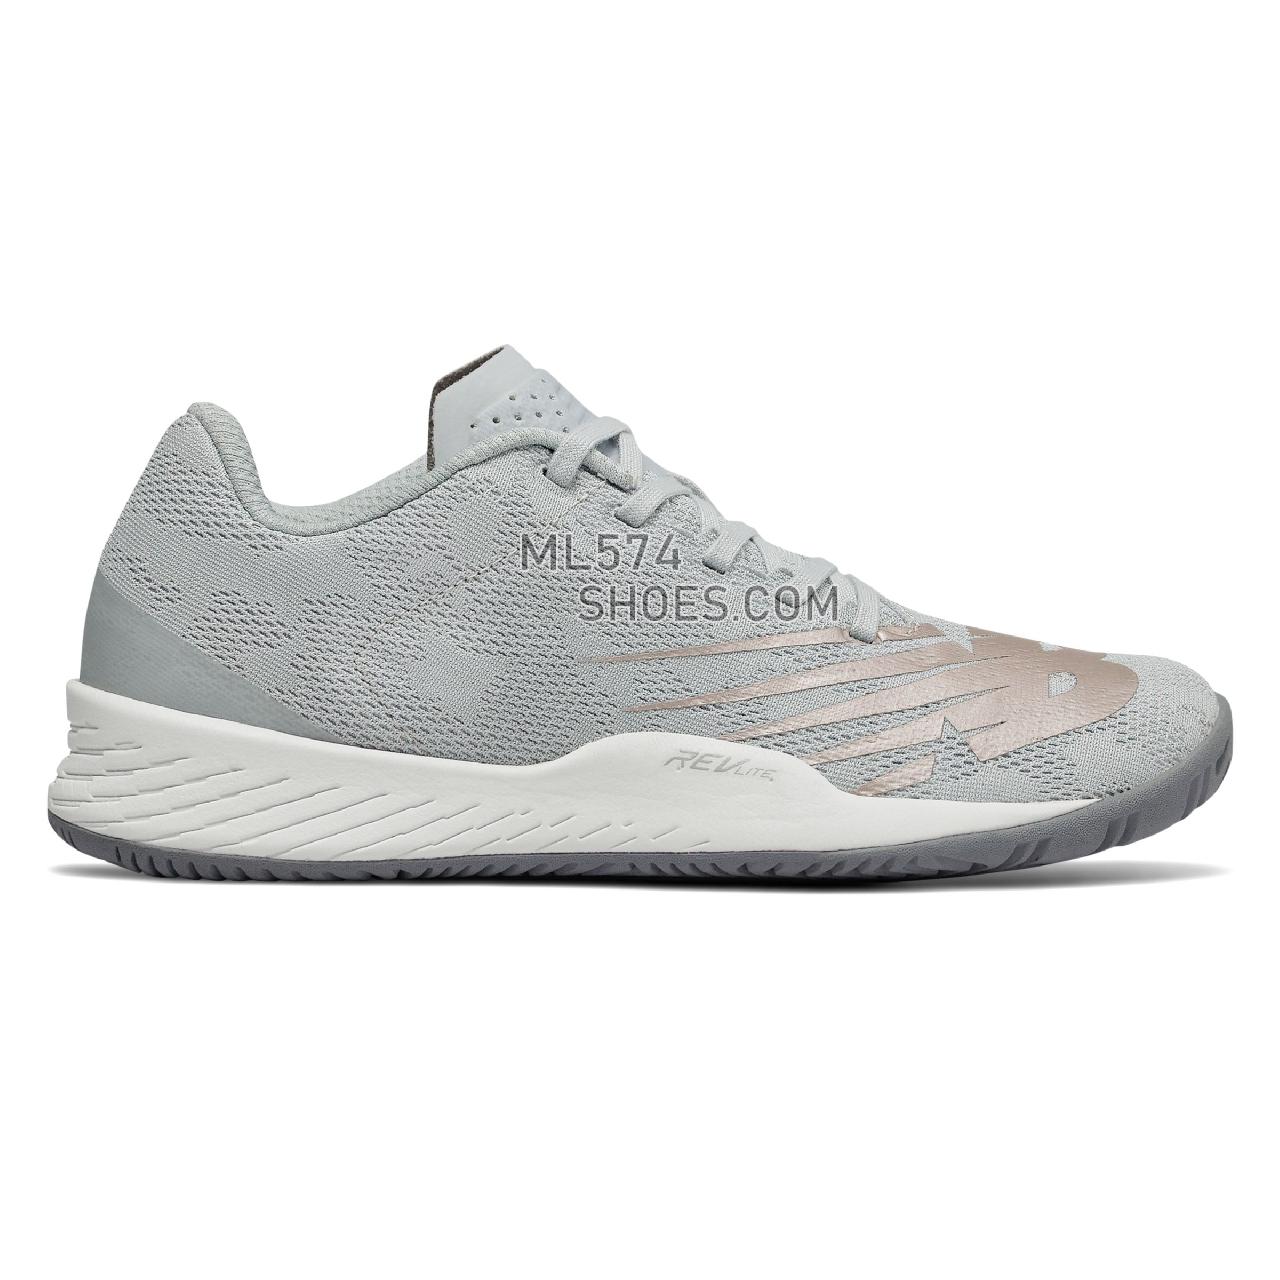 New Balance 896v3 - Women's Tennis - Grey with Champagne and Light Mango - WCH896M3